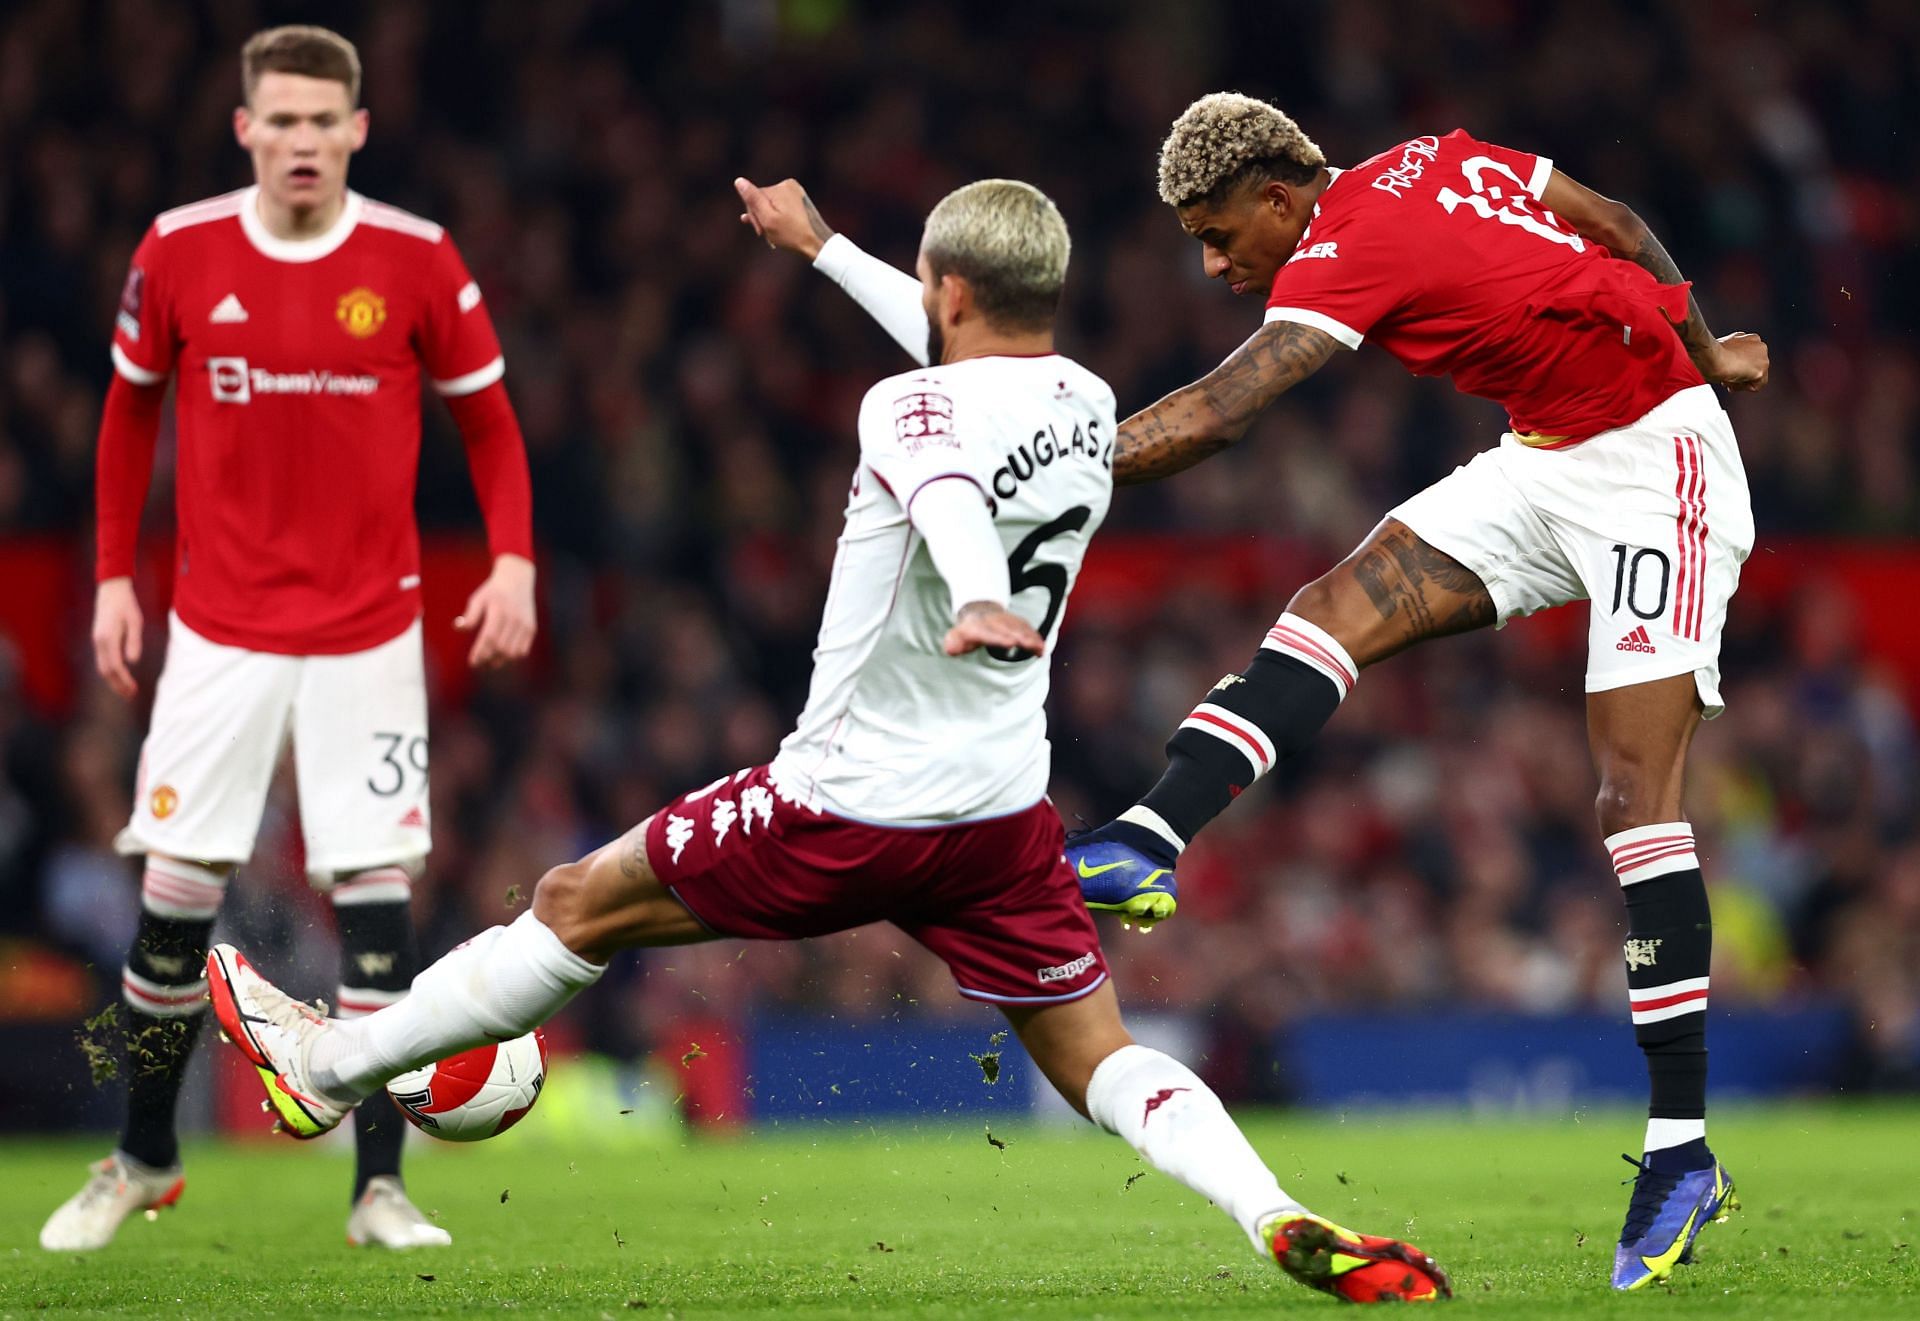 United opted for a different formation in the FA Cup tie against Aston Villa